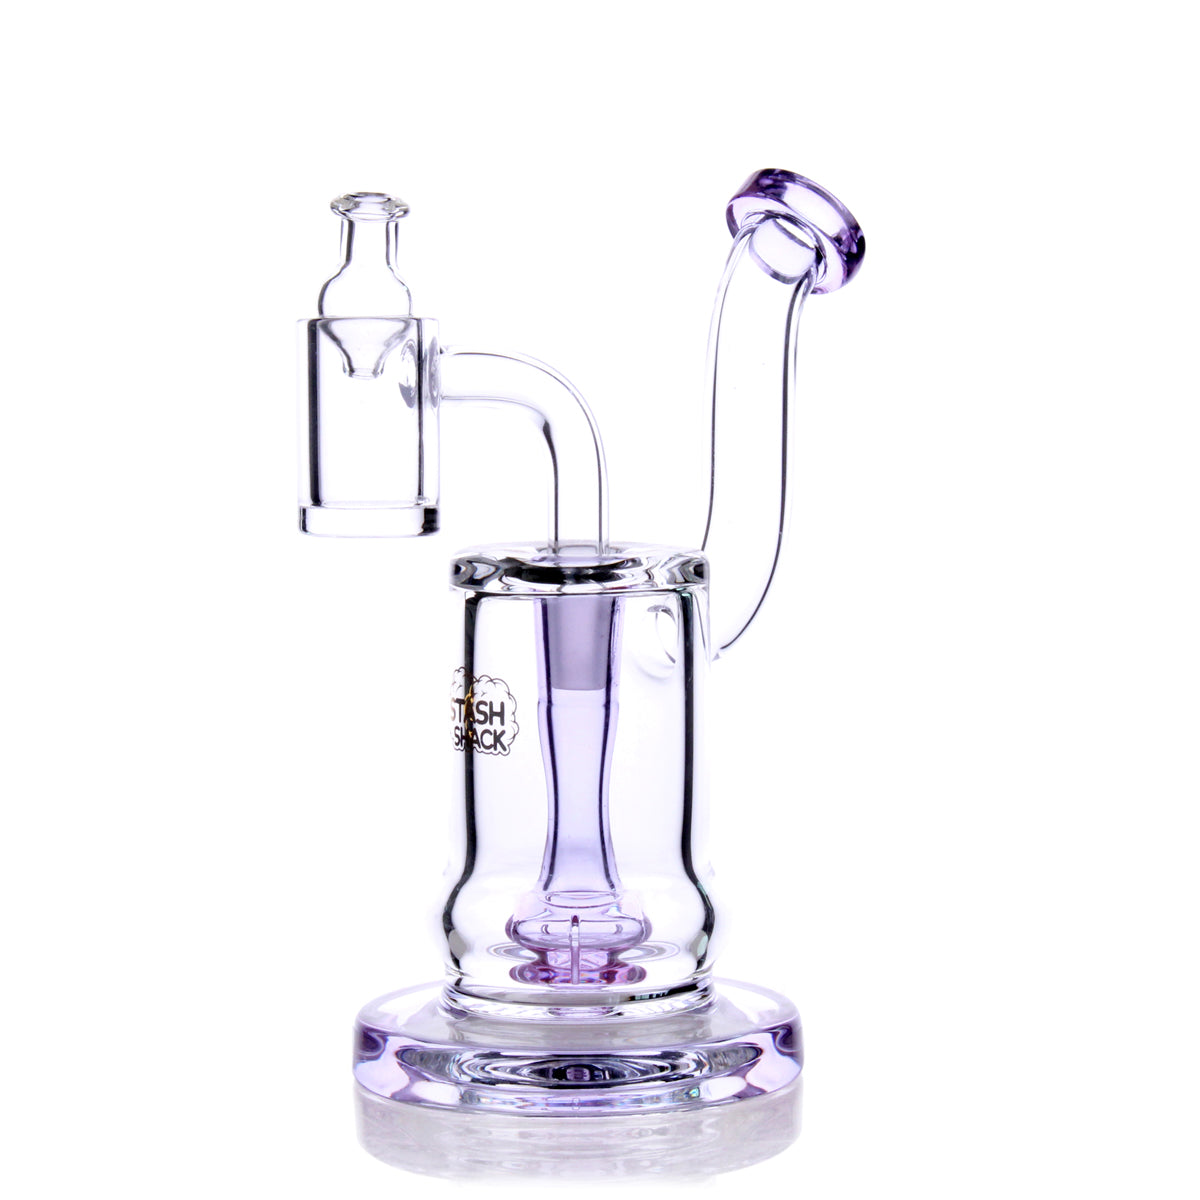 HydroBarrel Mini Rig in Purple by The Stash Shack with Showerhead Percolator, Front View